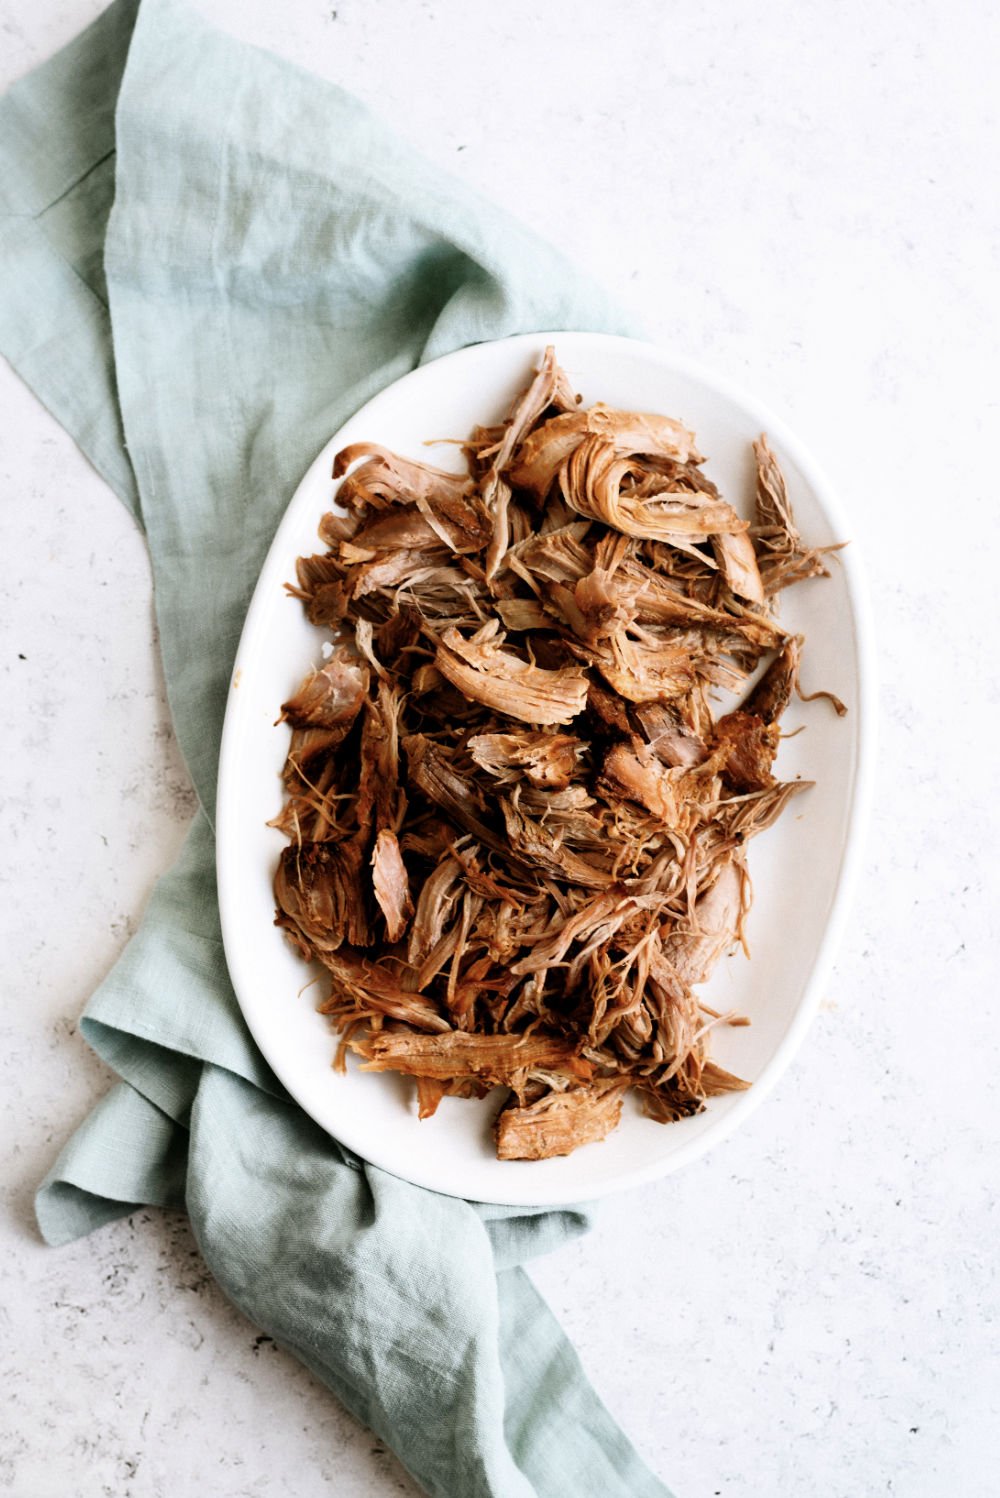 shredded pork cooked in a pressure cooker on a white serving tray